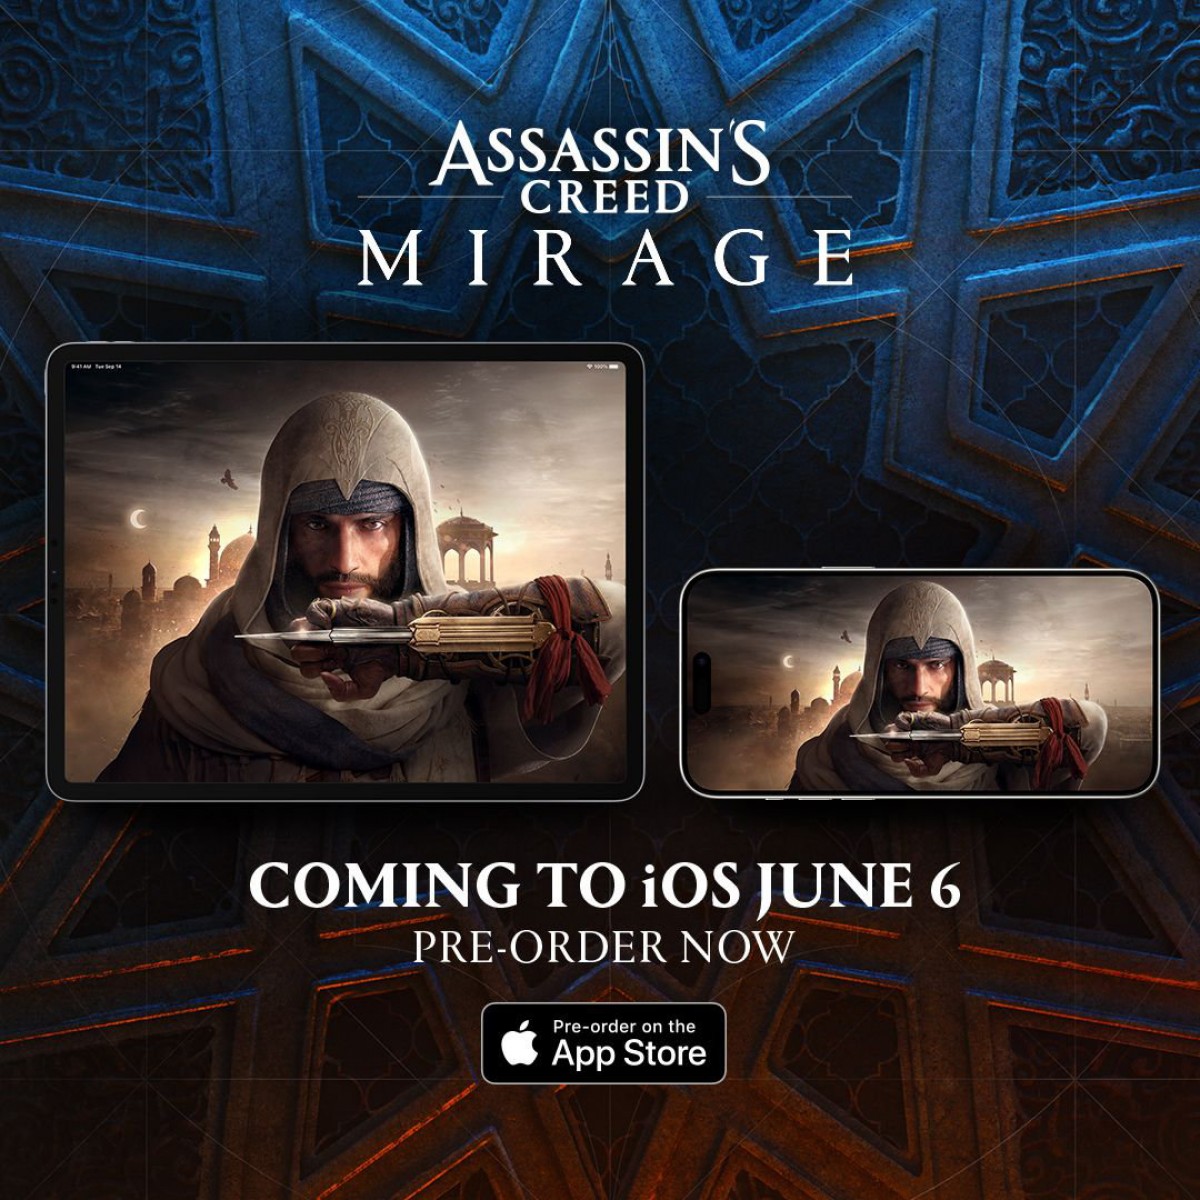 Assassin's Creed Mirage Brings Baghdad to Your iPhone This Summer